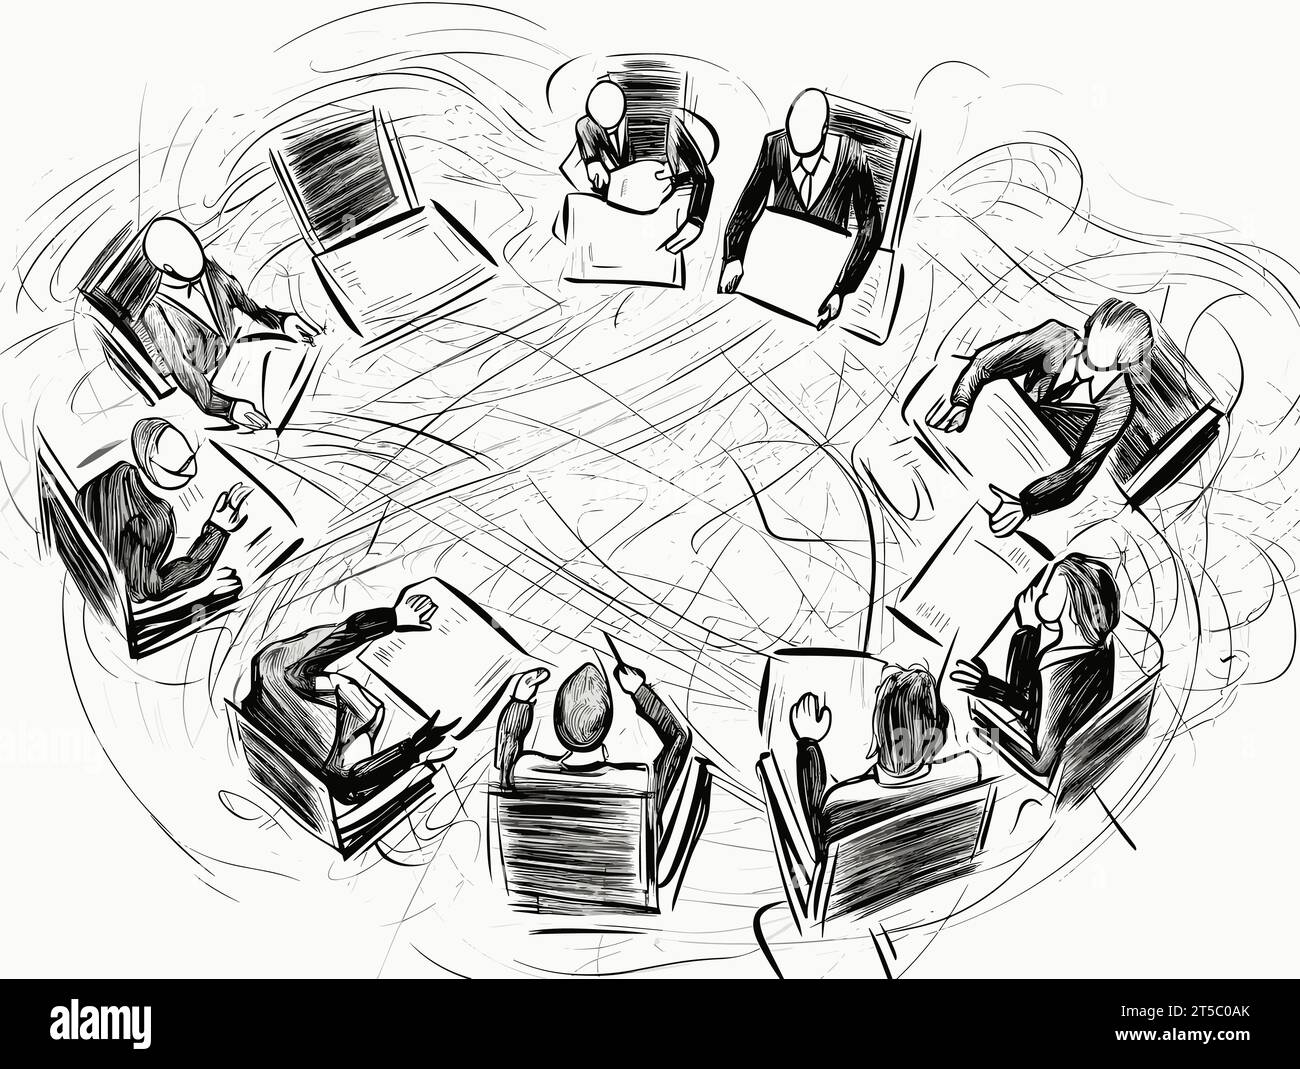 Drawing of Business meeting scene top view illustration separated, sweeping overdrawn lines. Stock Vector